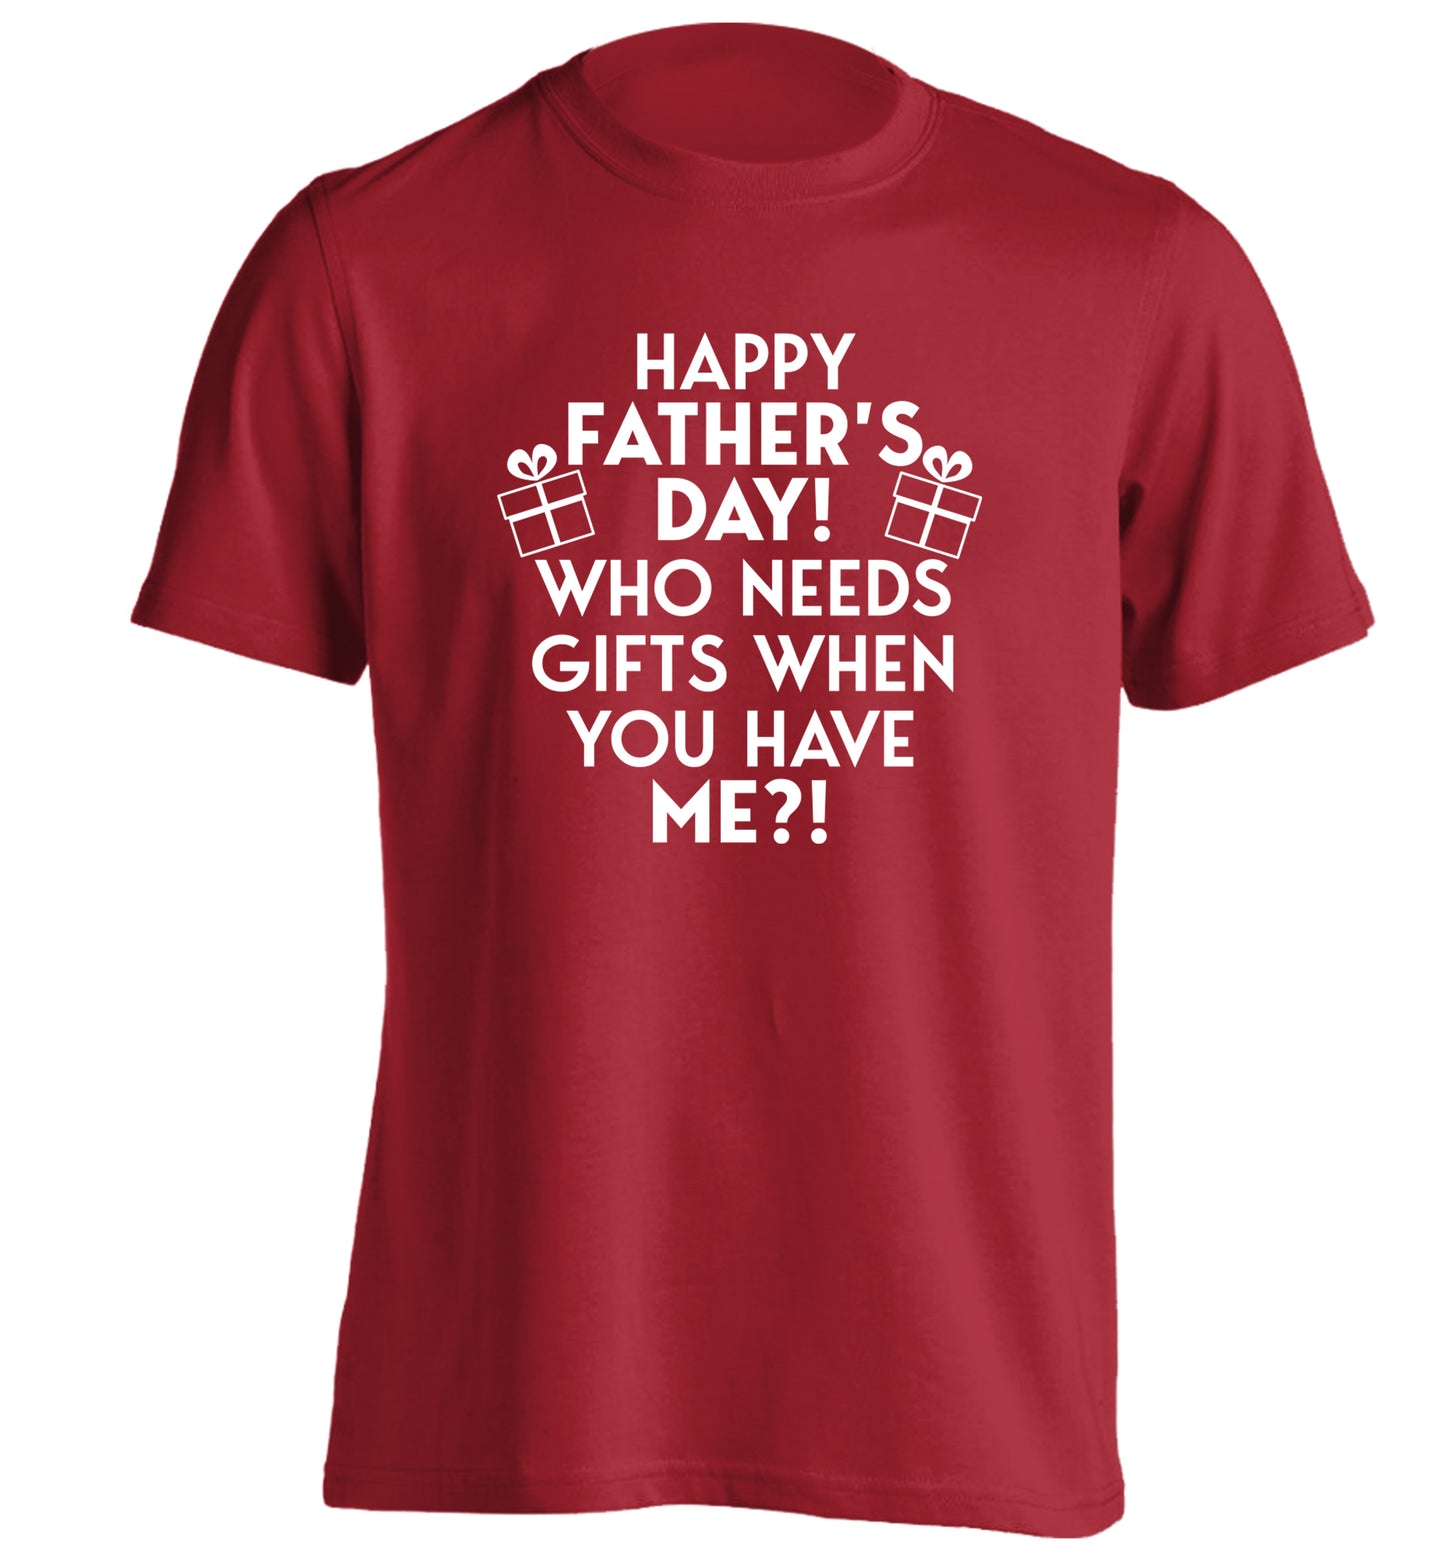 Happy Father's day, who needs a present when you have me adults unisex red Tshirt 2XL